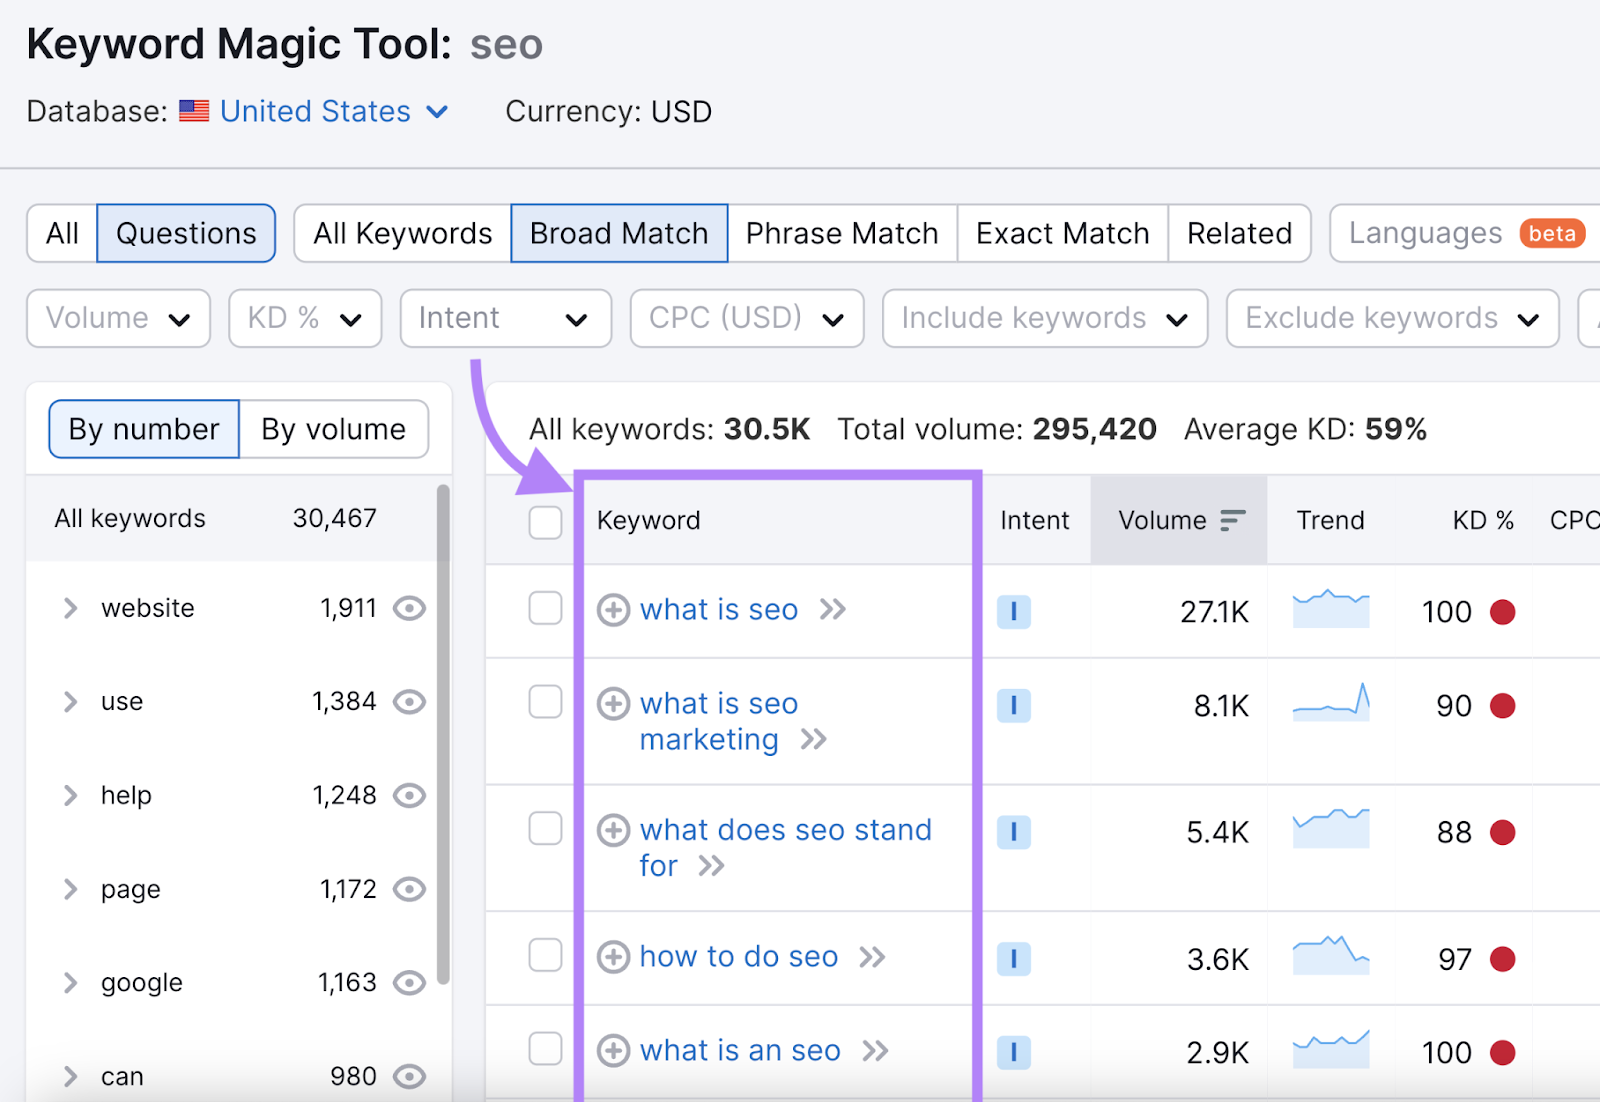 "Questions" keywords related to "seo" found in Keyword Magic Tool